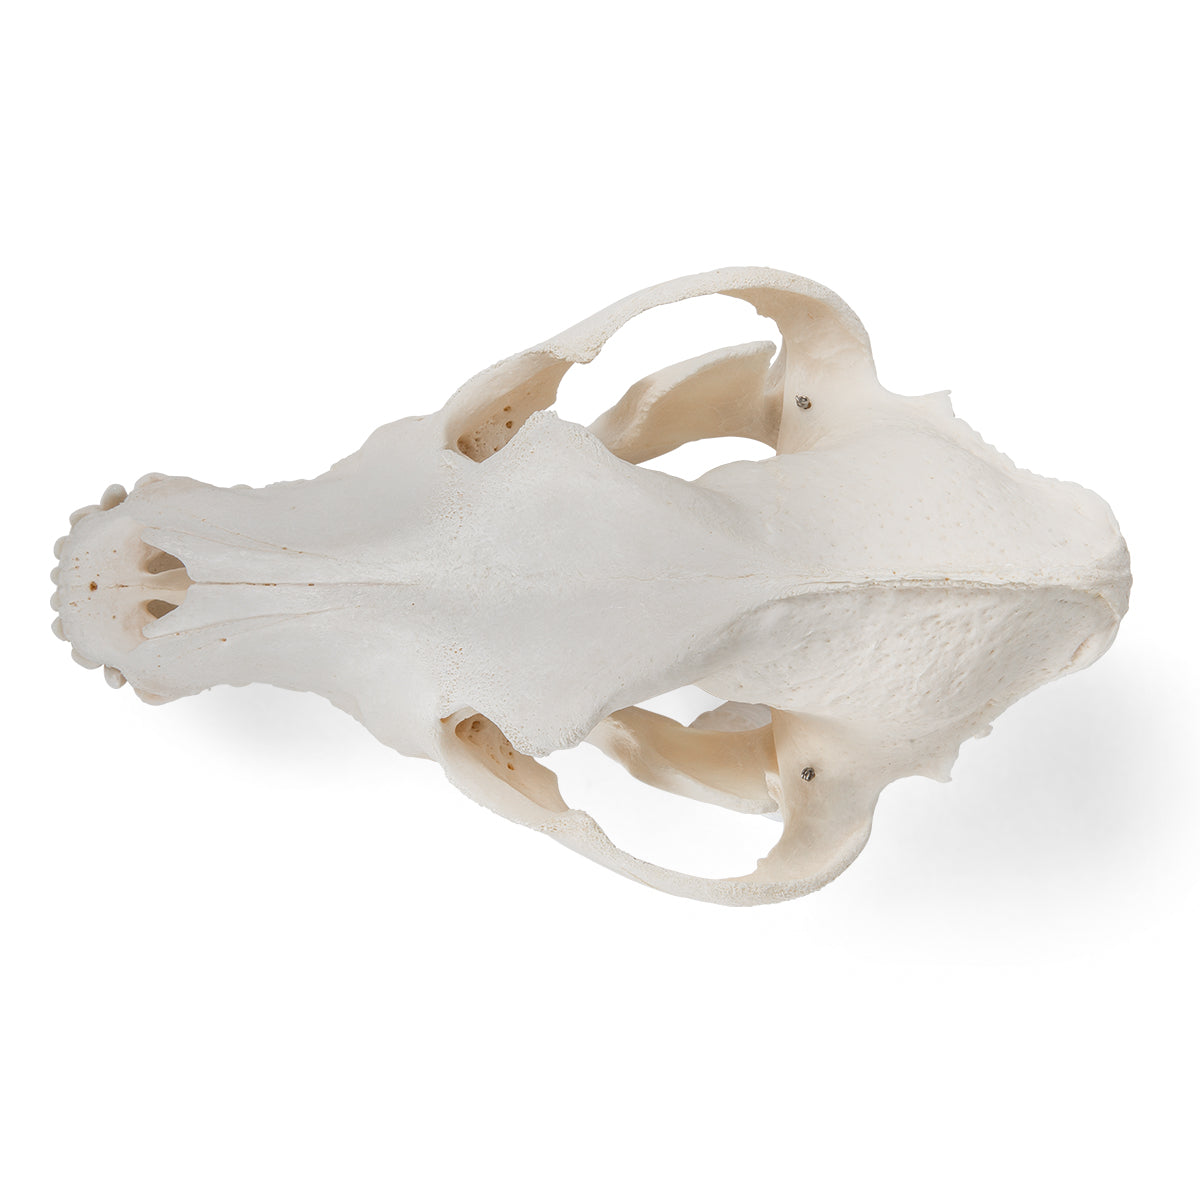 Real dog skull (Canis domesticus)